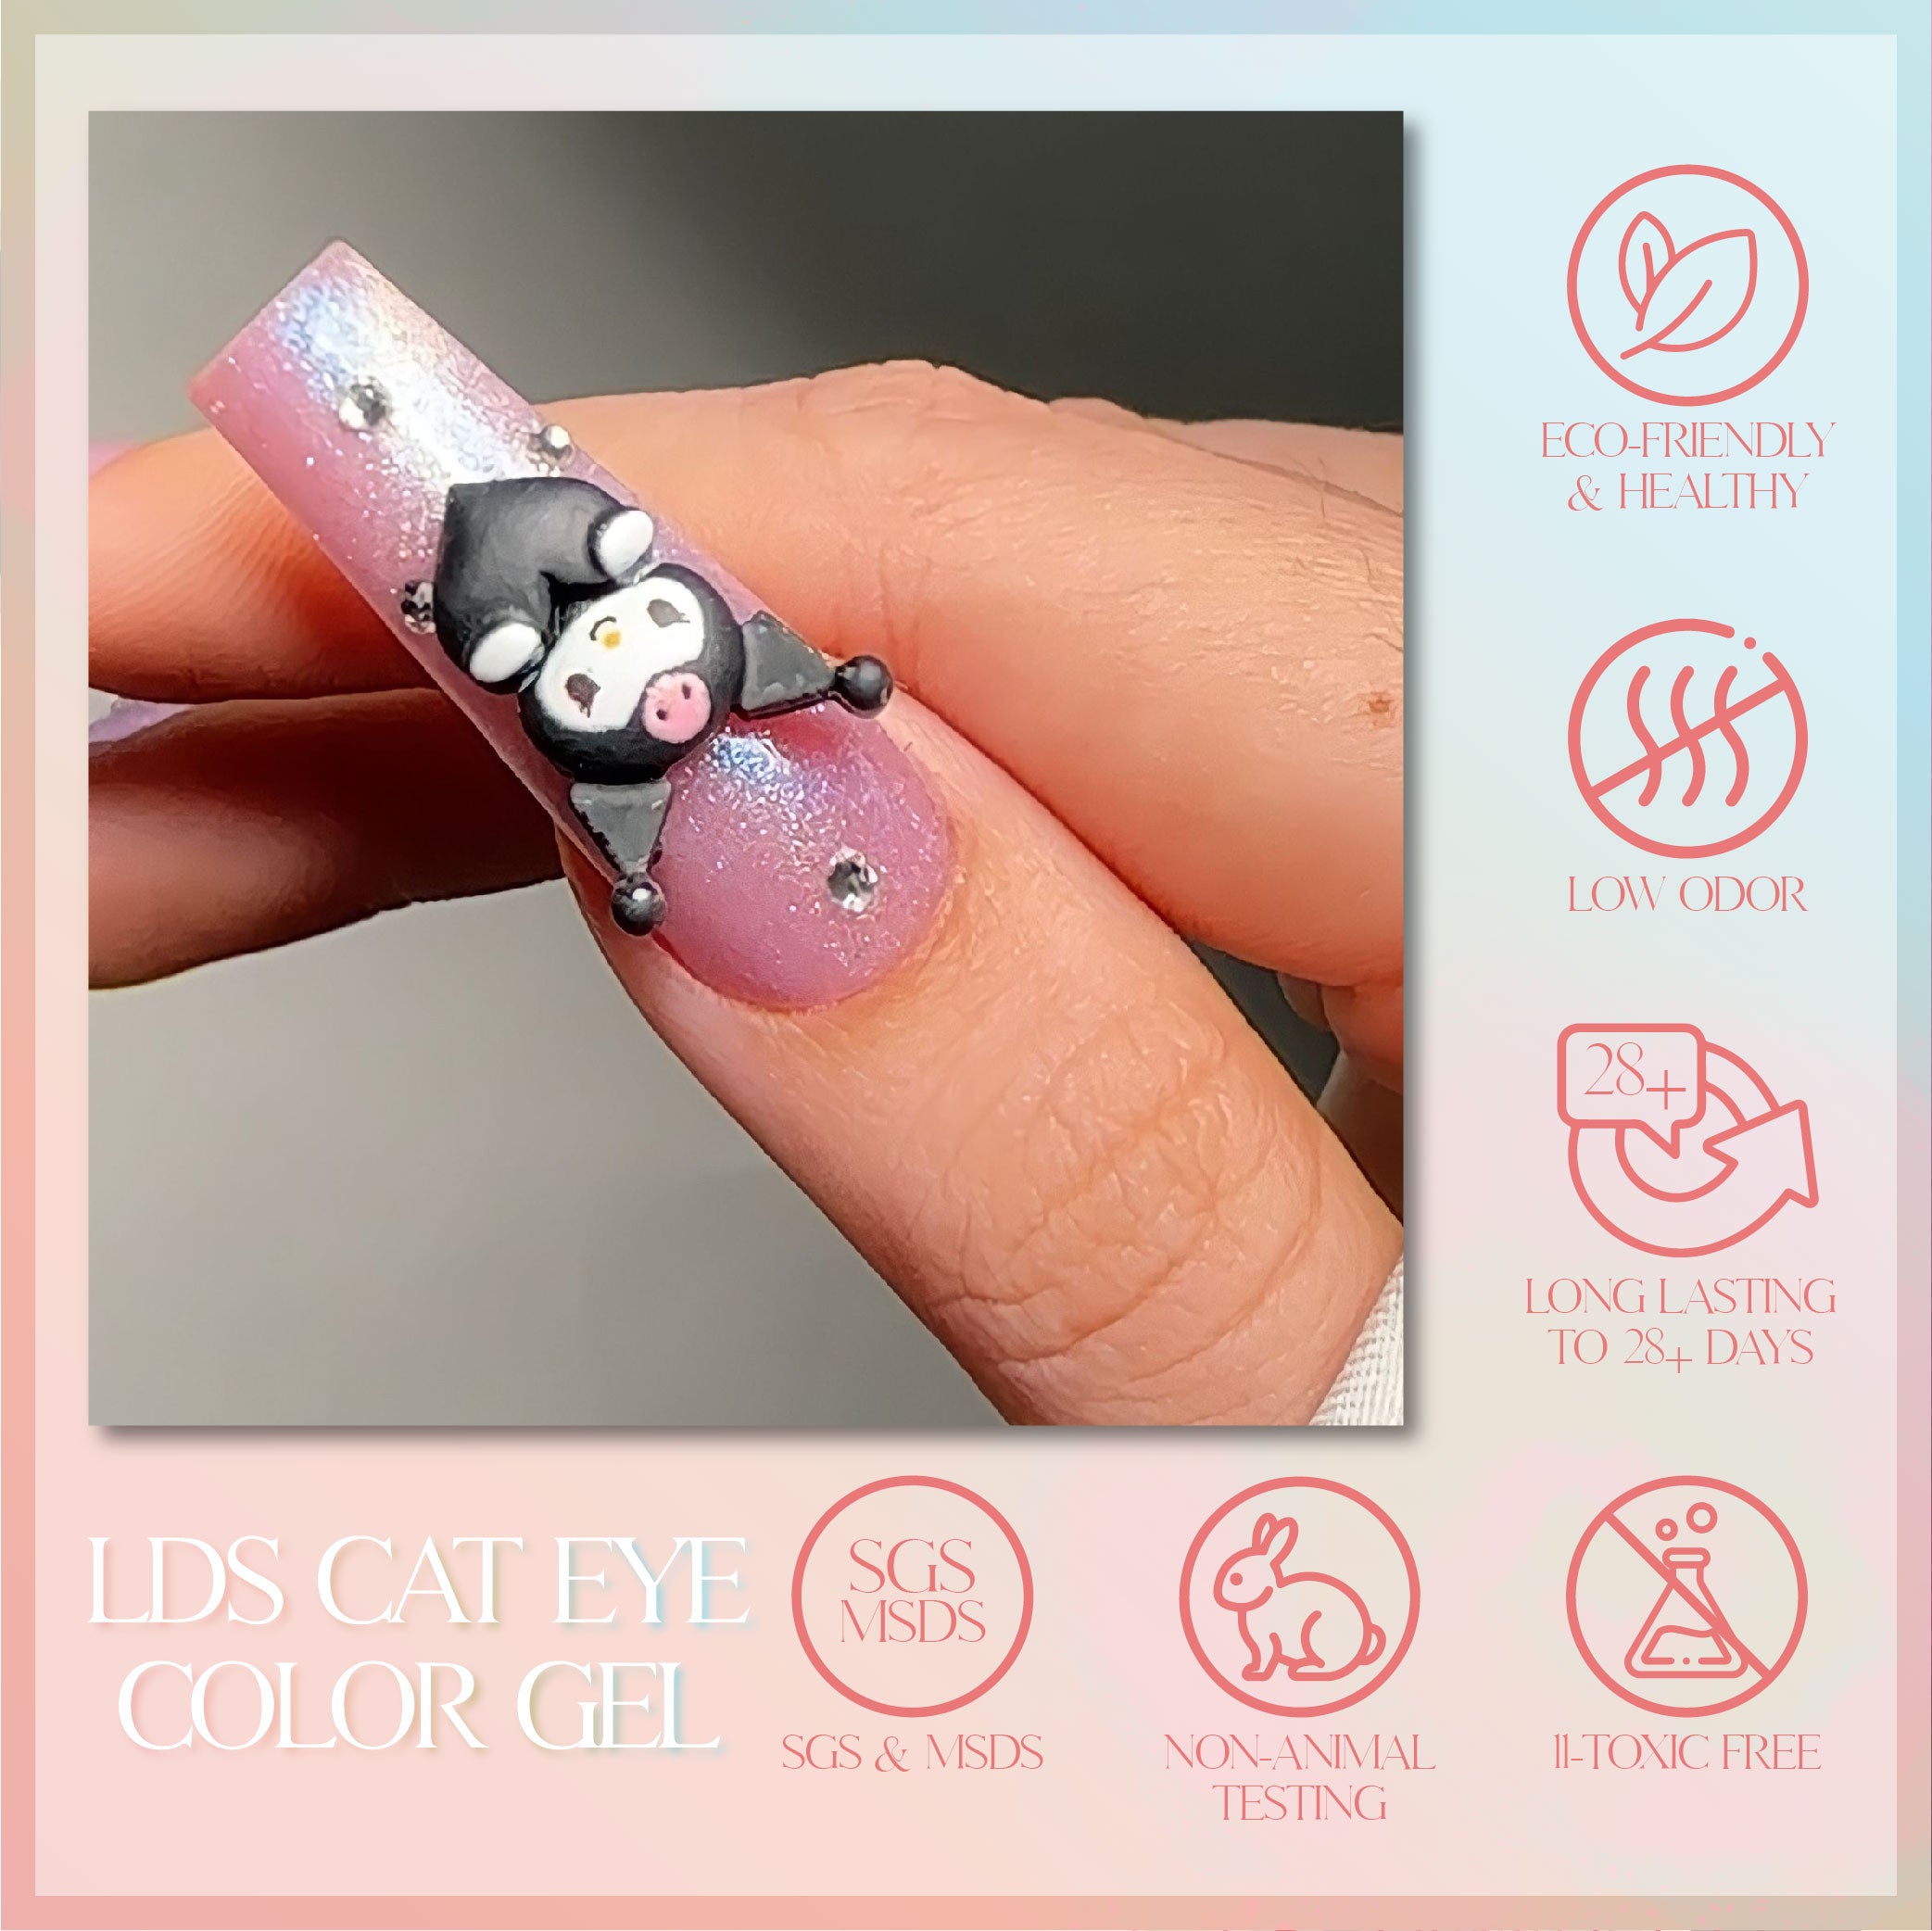 LDS Pearl CE - 03 - Pearl Veil Cat Eye Collection